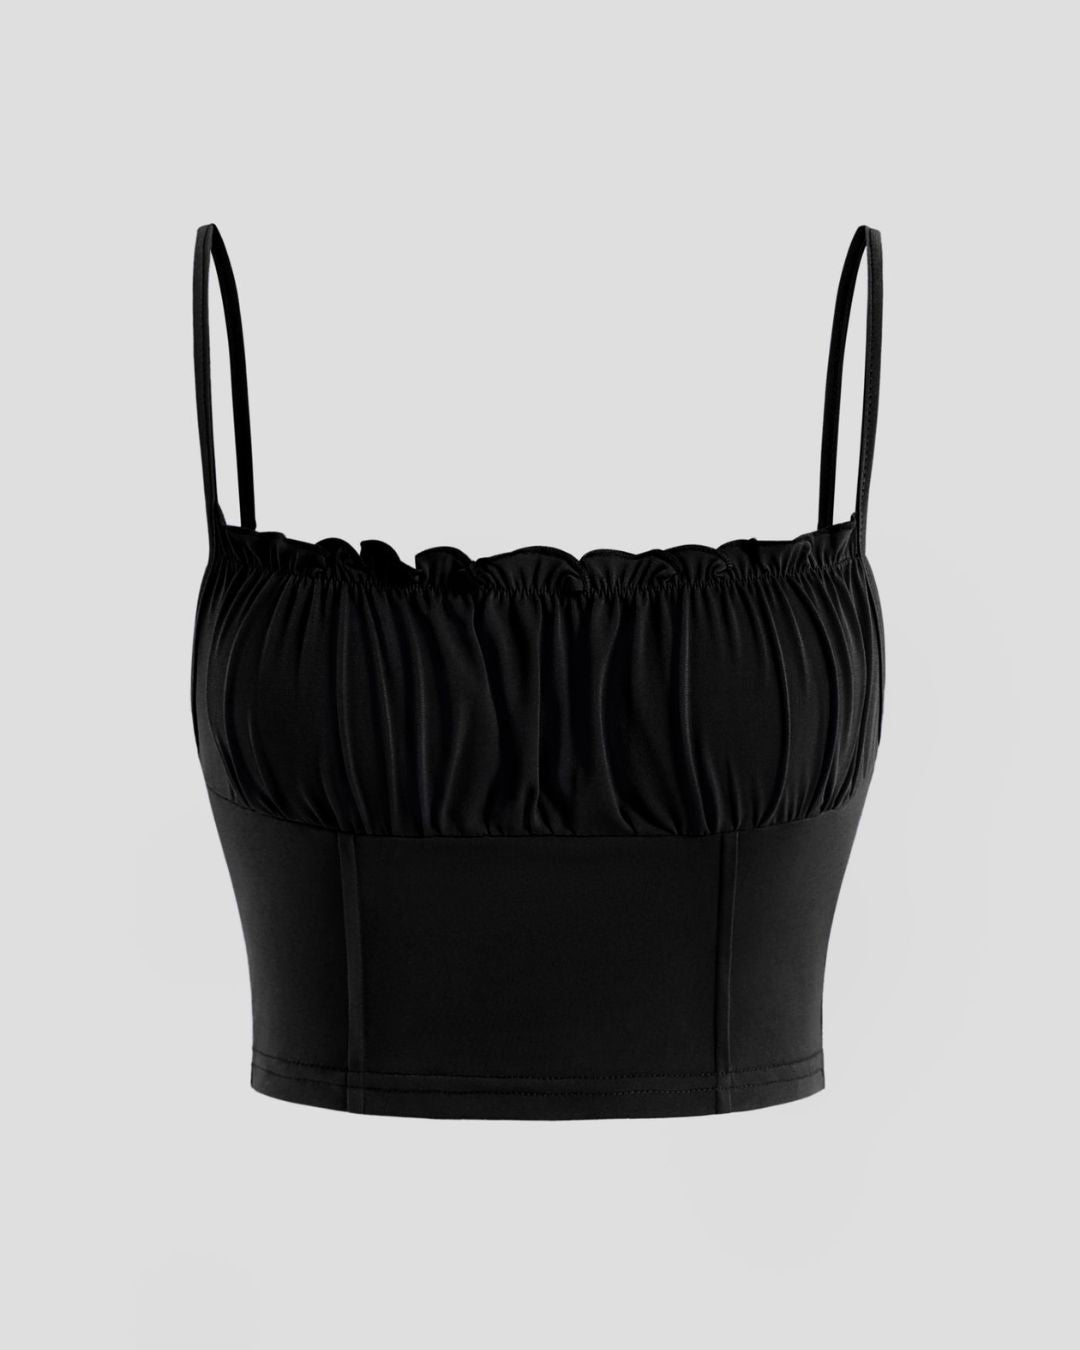 RUCHED CROP TOP,adjustable strap, black, cami neck, casual, crop, knitted, ribbed, ruched, skinny fit, sleeveless, solid, streetwear, stretchable, tops, topwear,ruched-crop-top-black,Color- Black
Fabric- Ribbed
Fit- Skinny Fit 
Length- Crop
Neck- Cami Neck
Sleeves- Sleeveless
Straps- Adjustable Straps
Print- Solid
Details- Ruching